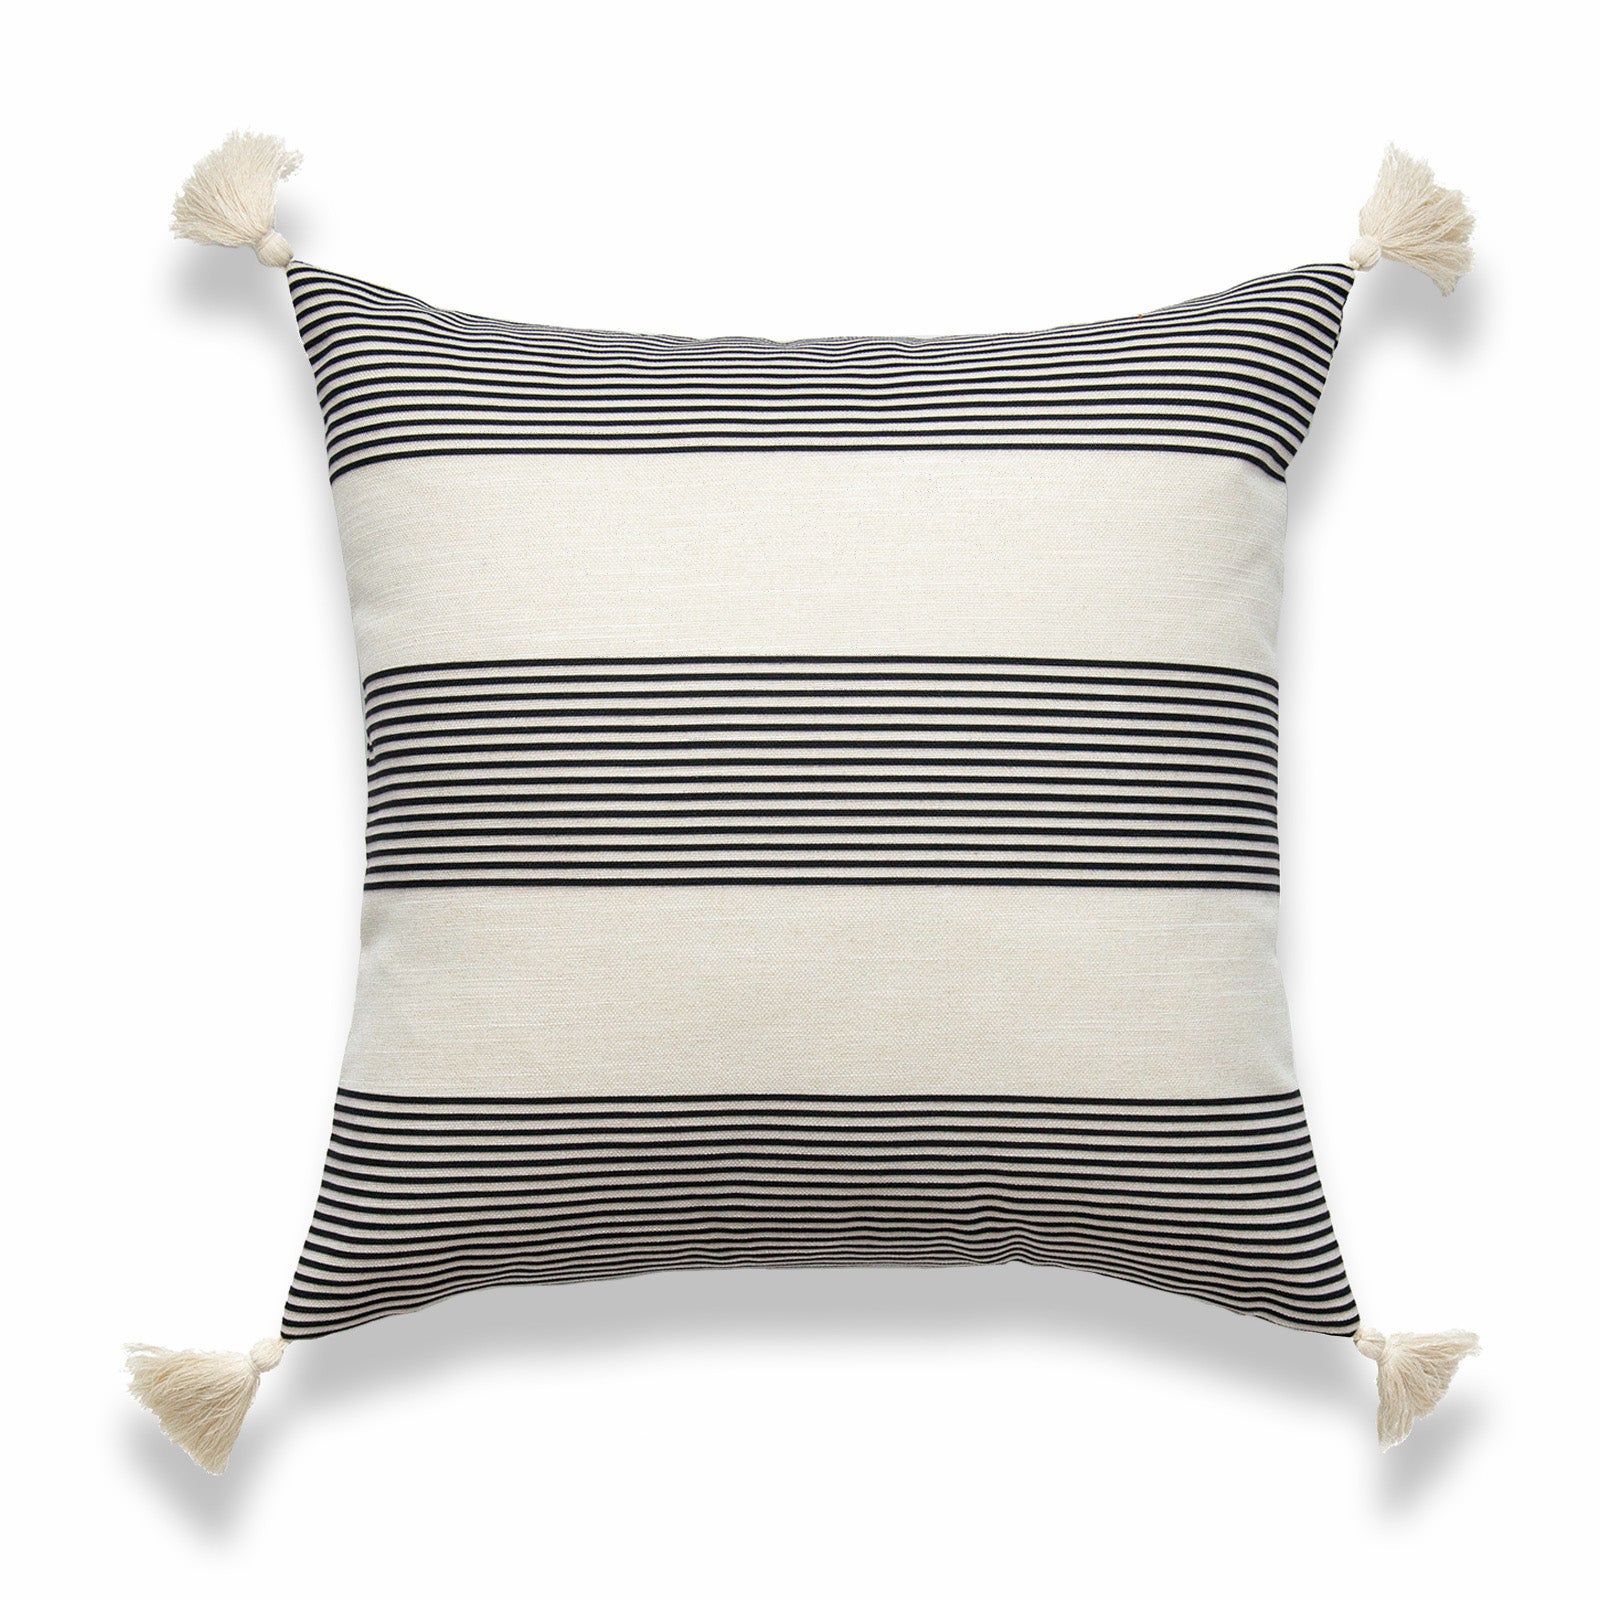 Moroccan Tassel Neutral Pillow Cover, Stripes, Gray Beige, 18"x18"